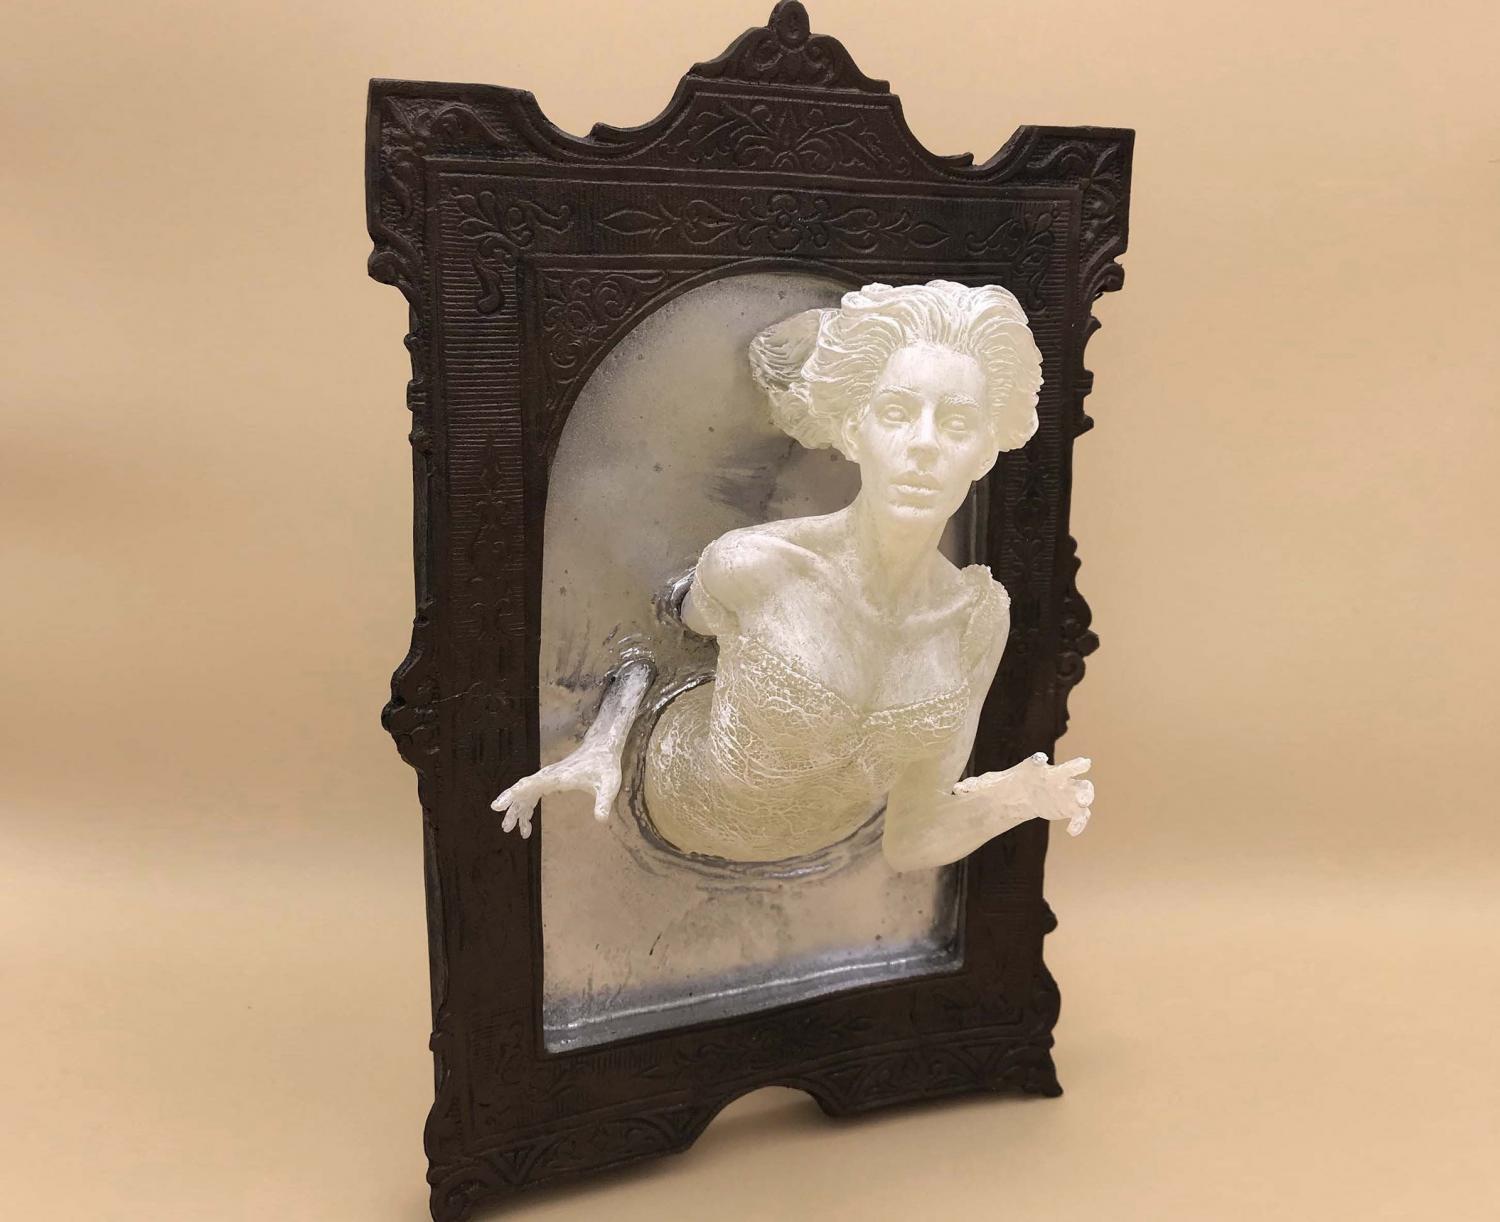 Super Creepy Ghost In The Mirror Wall Plaque That Glows In The Dark - 3D Mirror Ghost Figure Sculpture